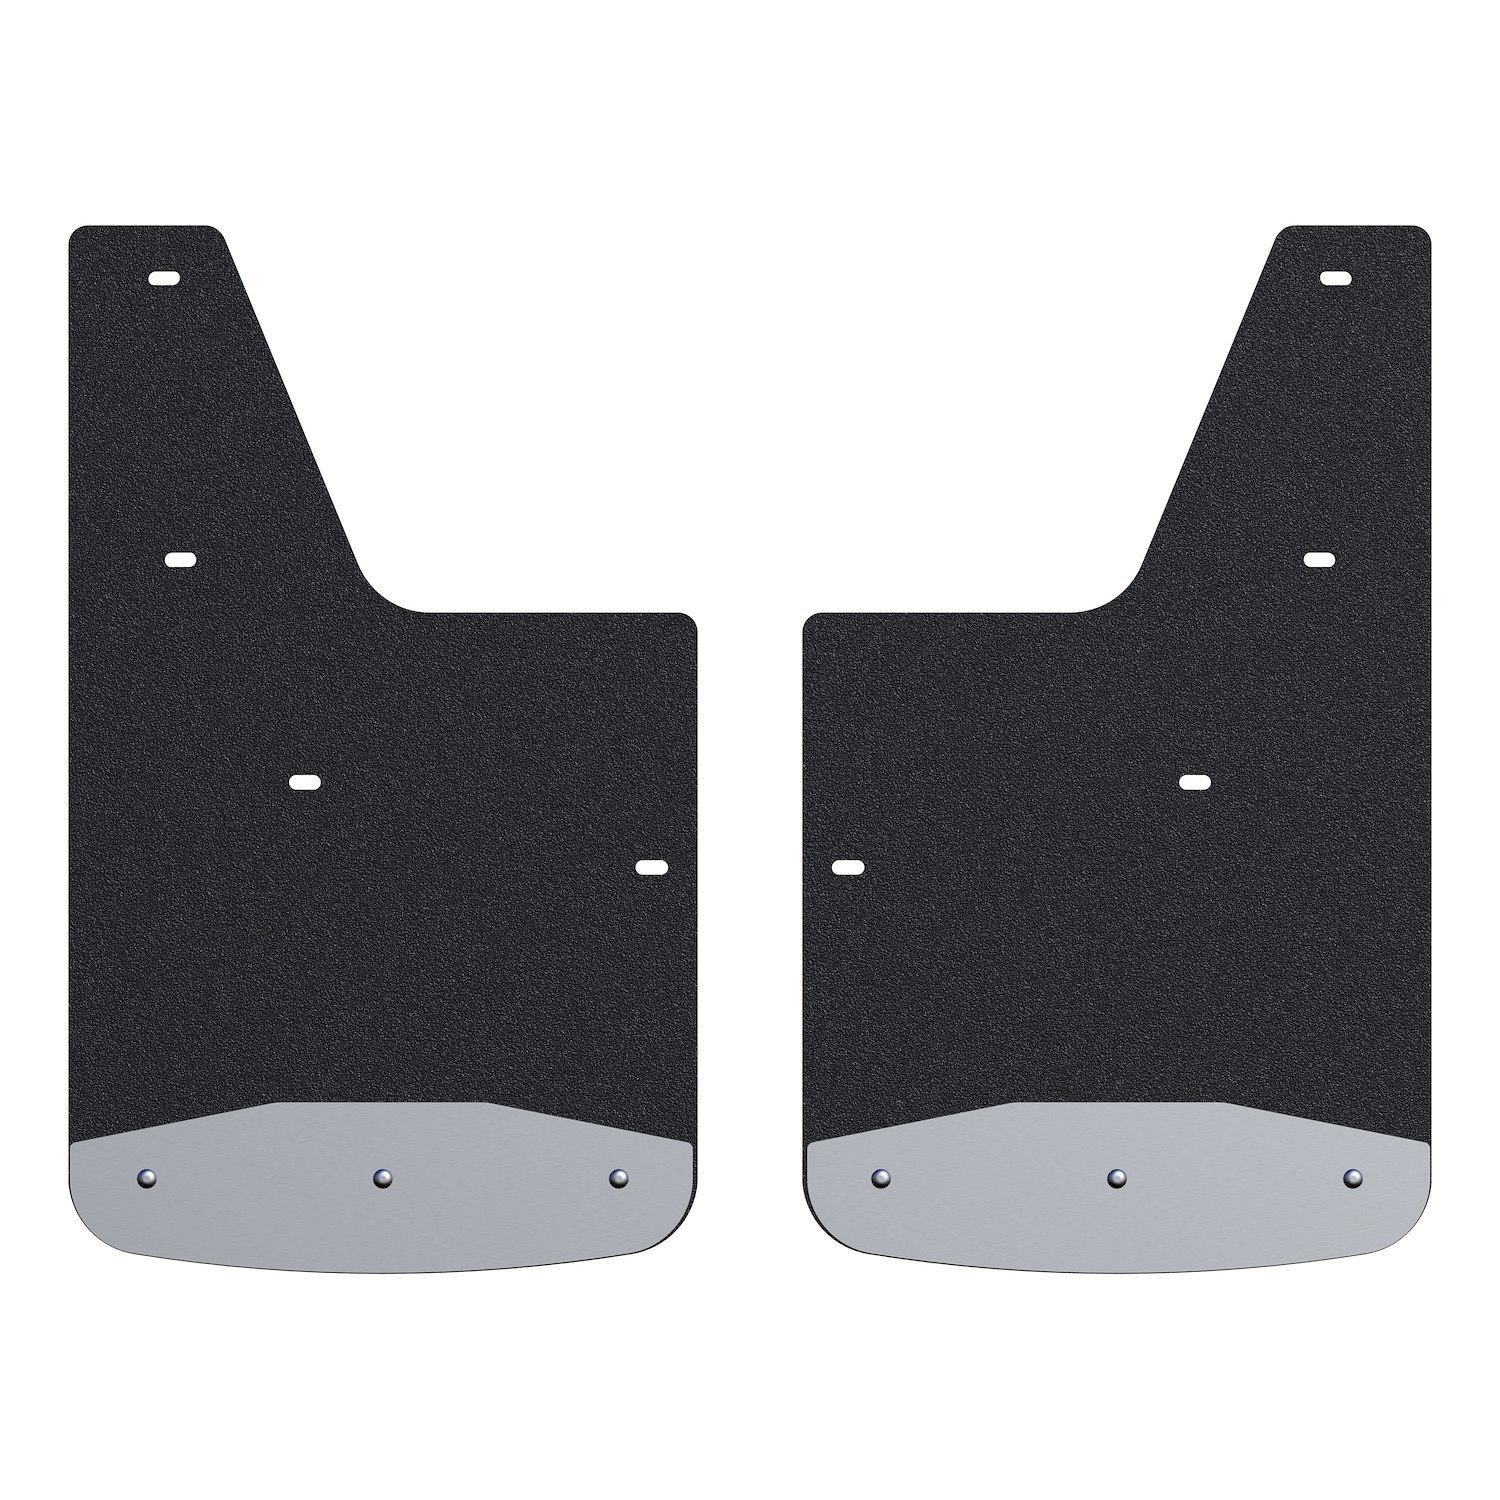 251441 Front 12 in. x 20 in. Rubber Mud Guards Fits Select Chevrolet Silverado 1500